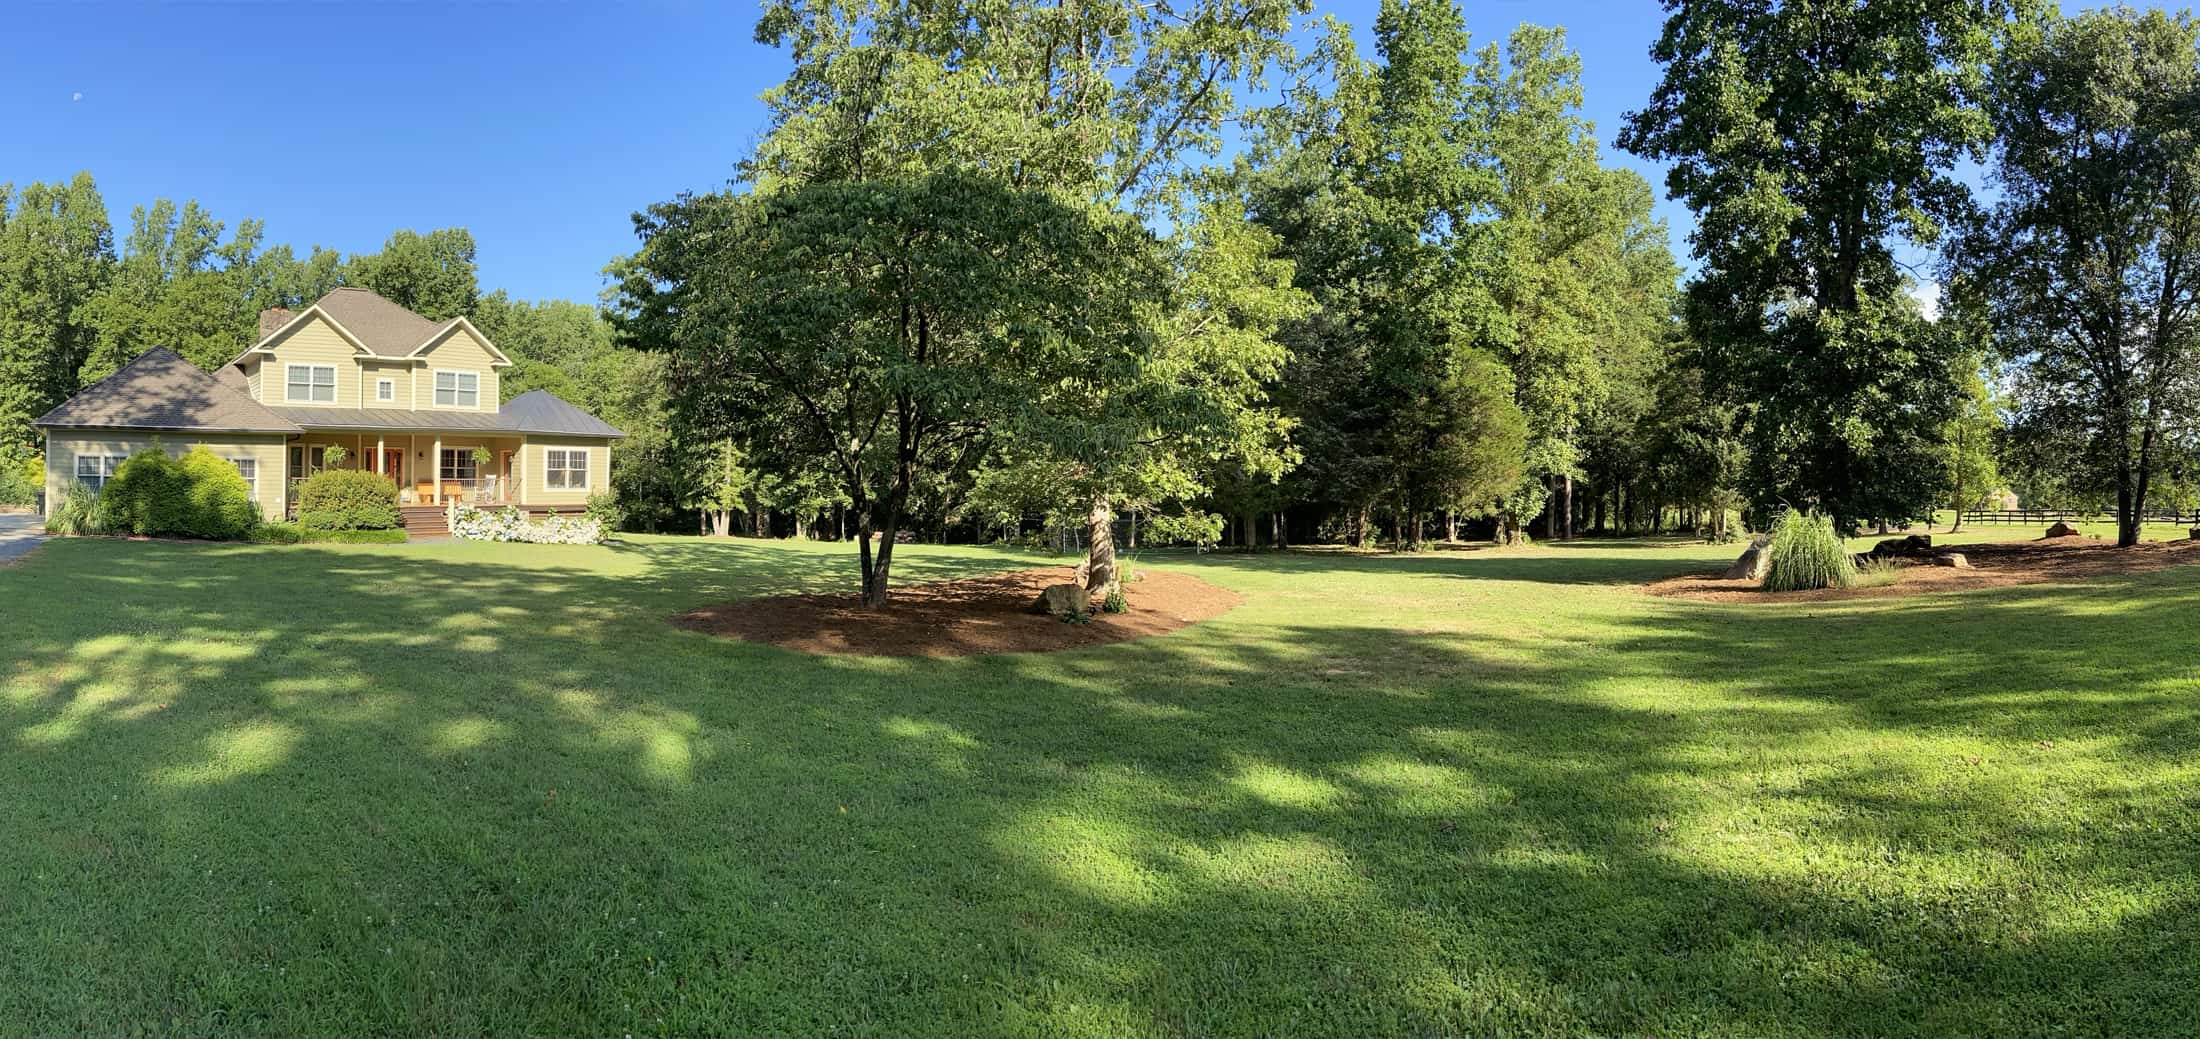 Tranquility and Proximity | Home for sale in Charlottesville, Earlysville, Virginia | Header Image Pool